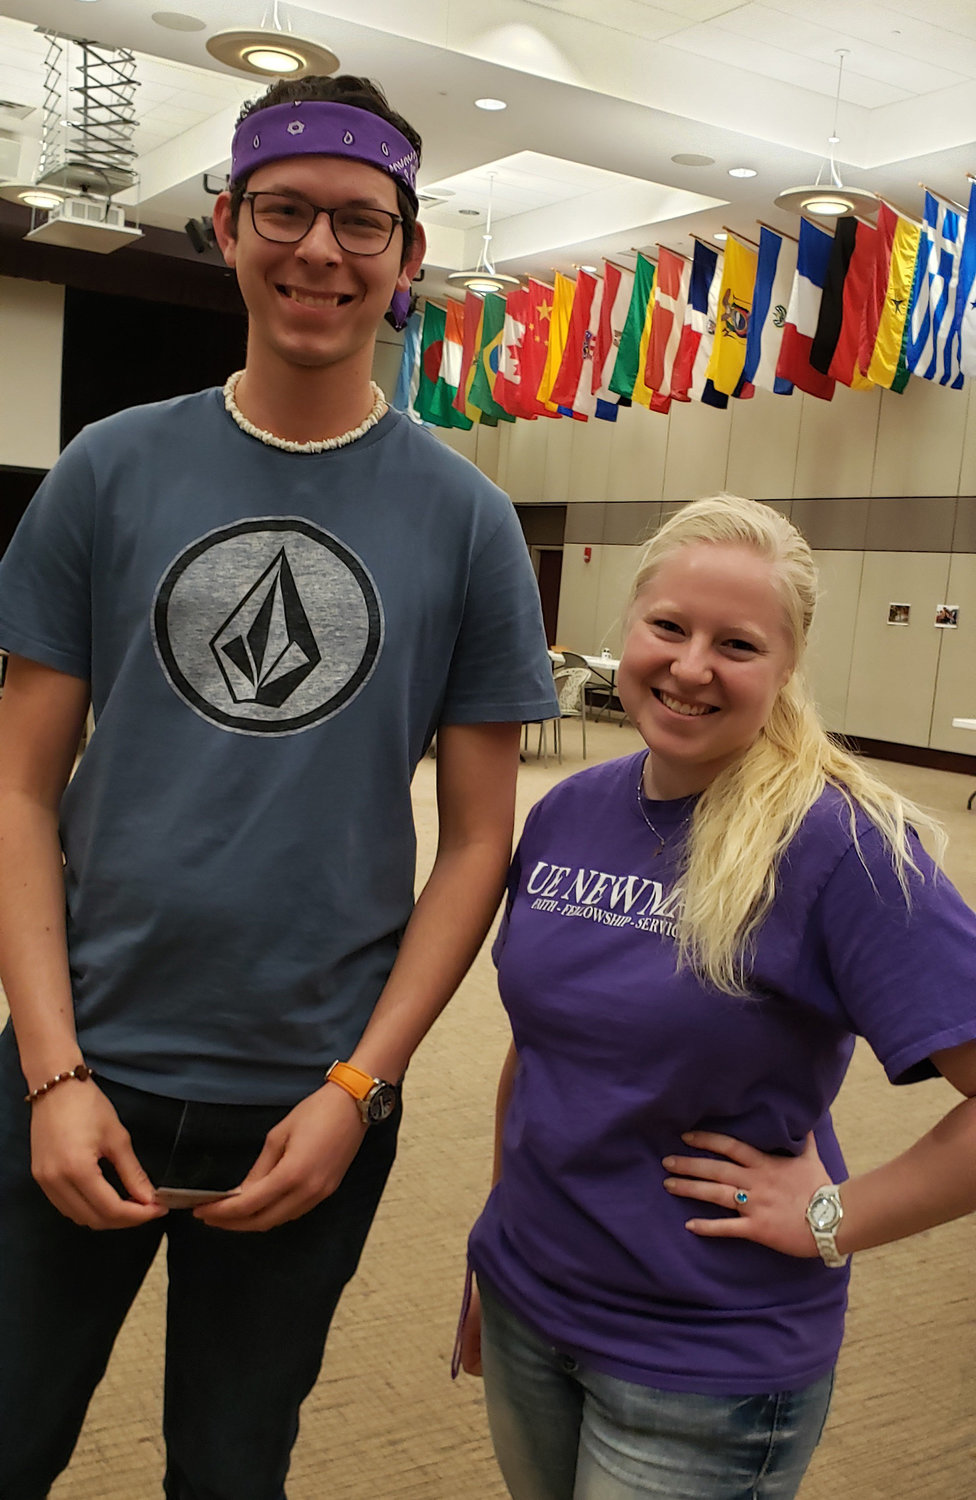 Students Edgardo Maldonado and Hailey Rose Thayer are pictured at the University of Evansville in Indiana. Thayer, a junior biology education major, is attending Cardinal Newman’s canonization with a group of local college students from the area and will read a petition at a vigil Mass in Rome the night before the canonization.